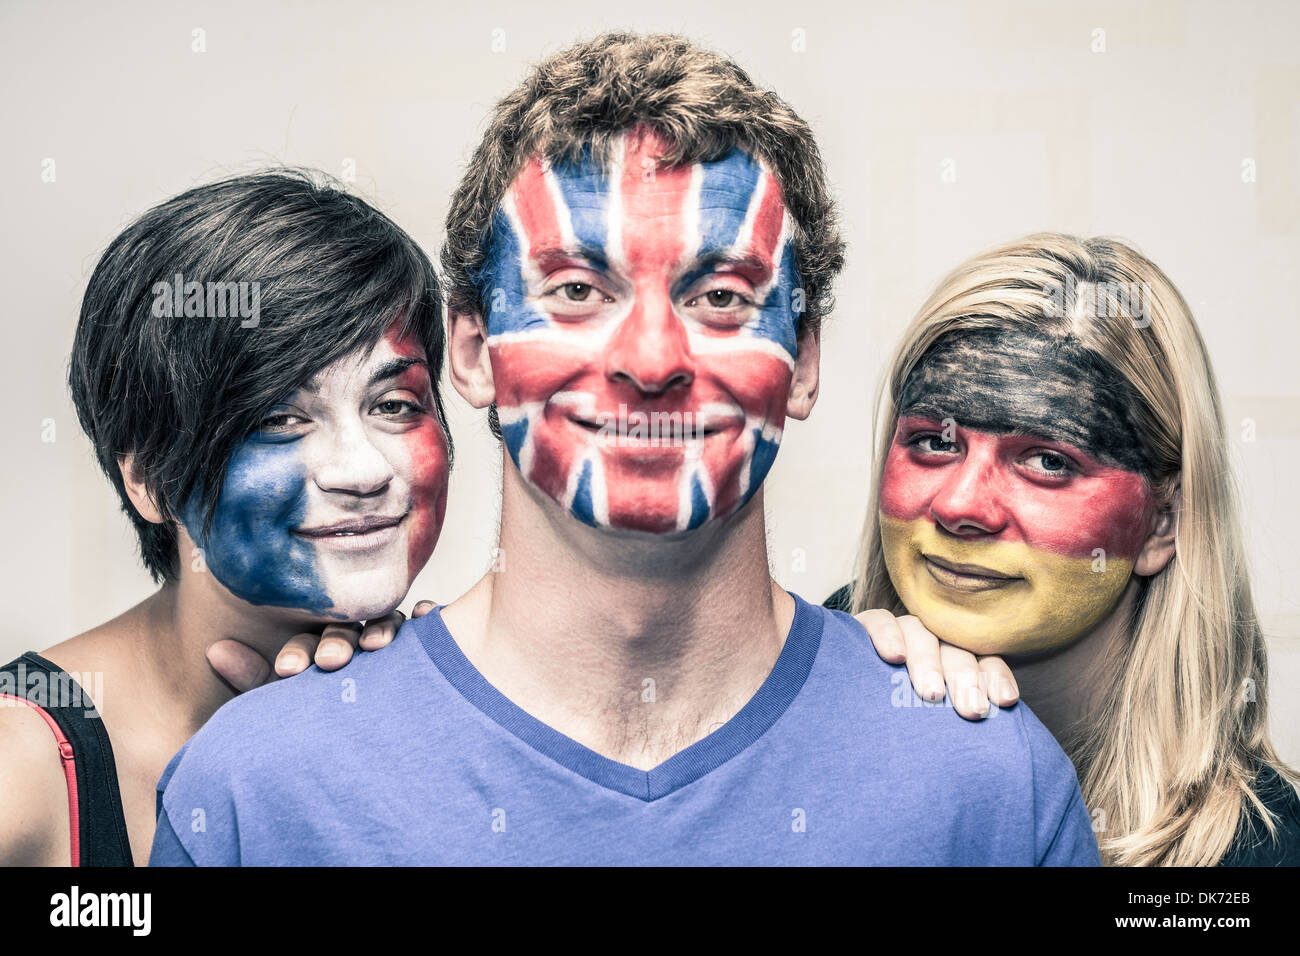 Portrait of young smiling people with painted European flags on their faces. Stock Photo